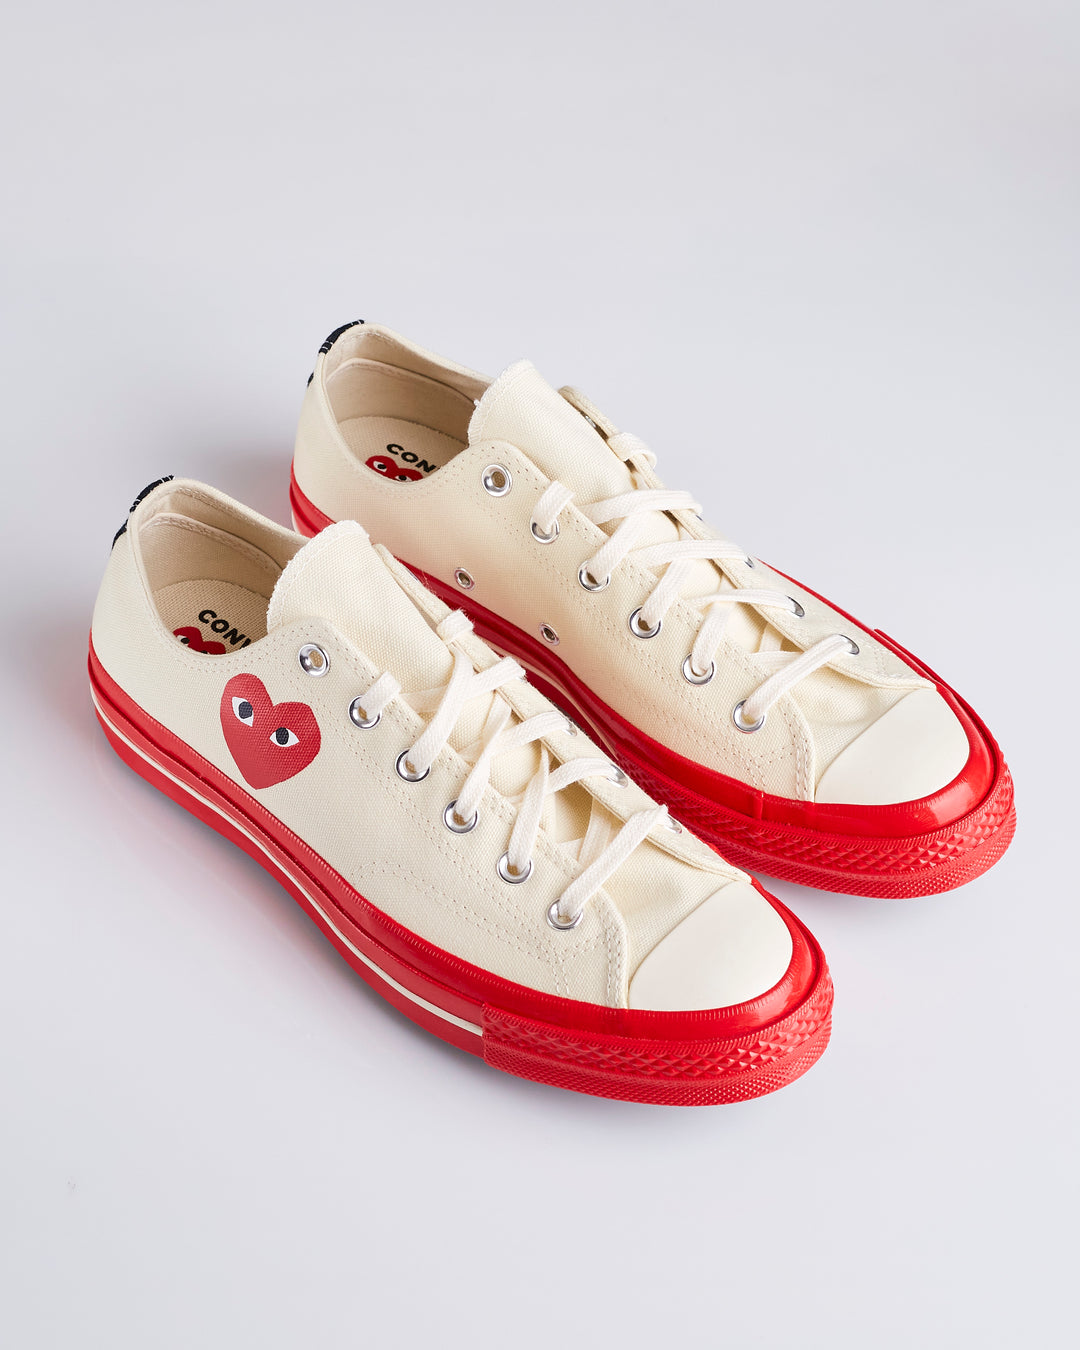 Comme des Garçons PLAY x Converse Chuck Taylor Red Sole Off White Low